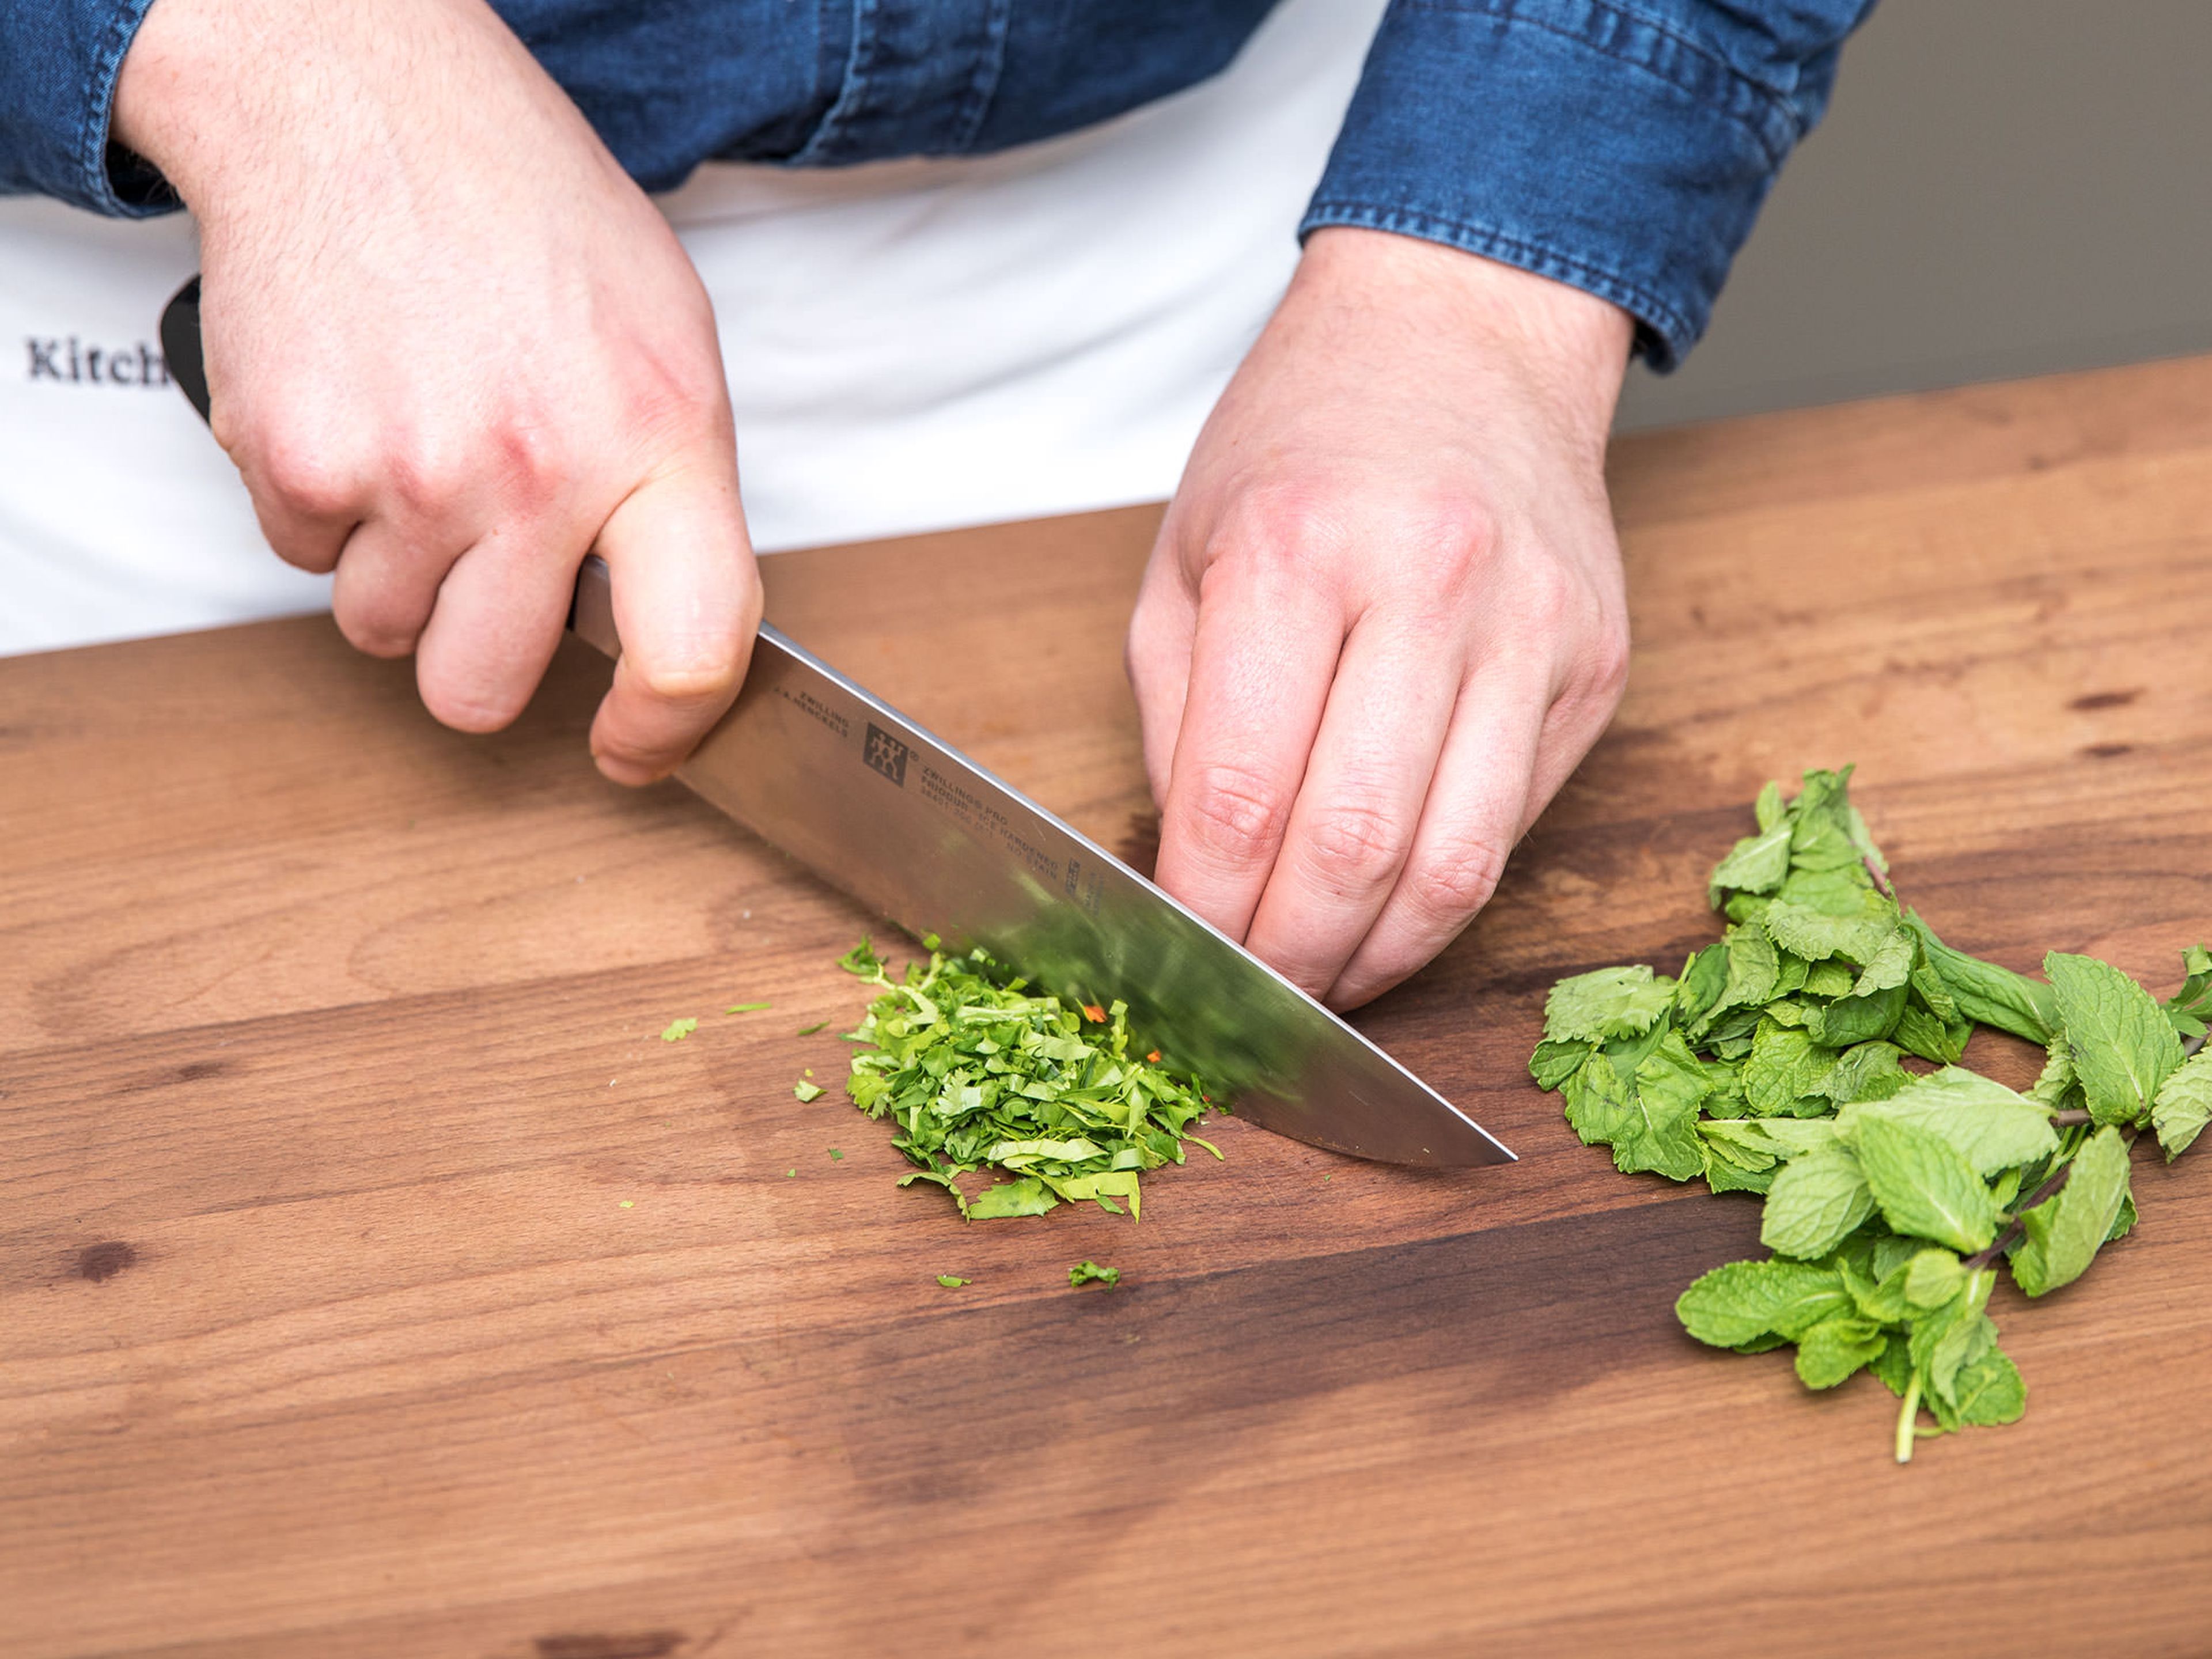 Wash the mint and cilantro, then remove the leaves and chop. Discard the stalks. Chill leaves in the refrigerator.